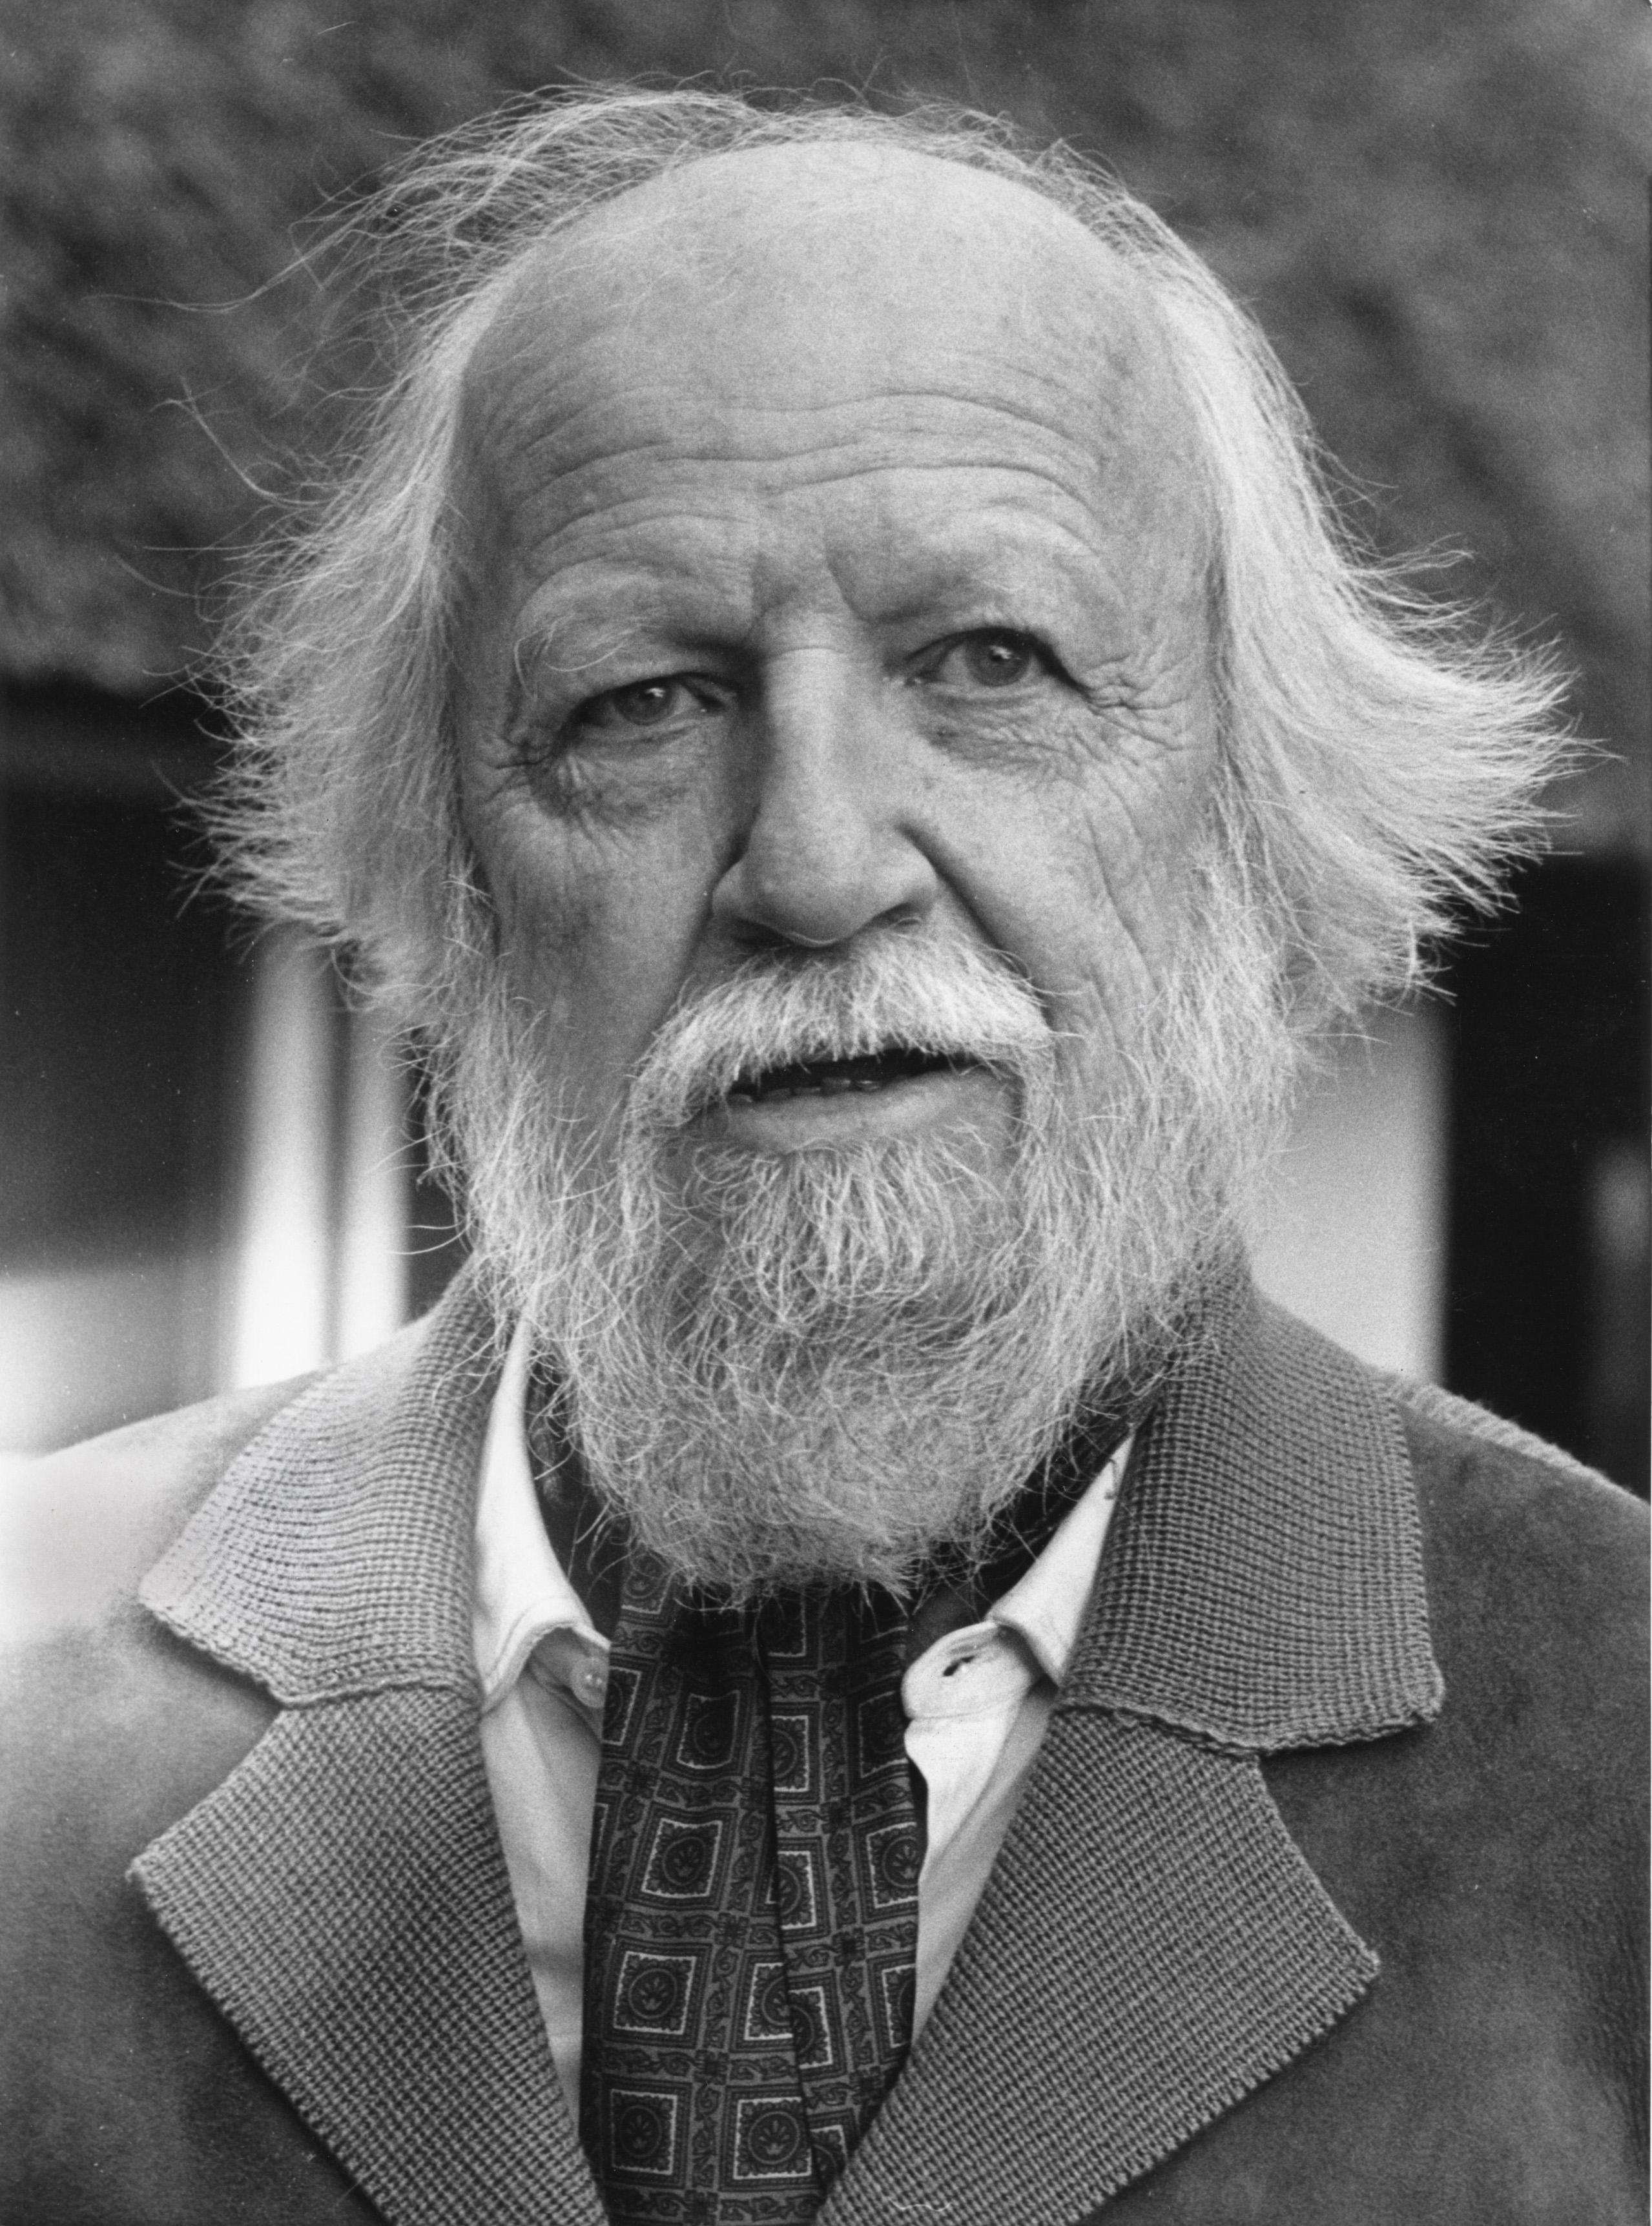 William Golding had firsthand knowledge of civil societies turned violent: He served in the Royal Navy in ferocious battles of World War II.